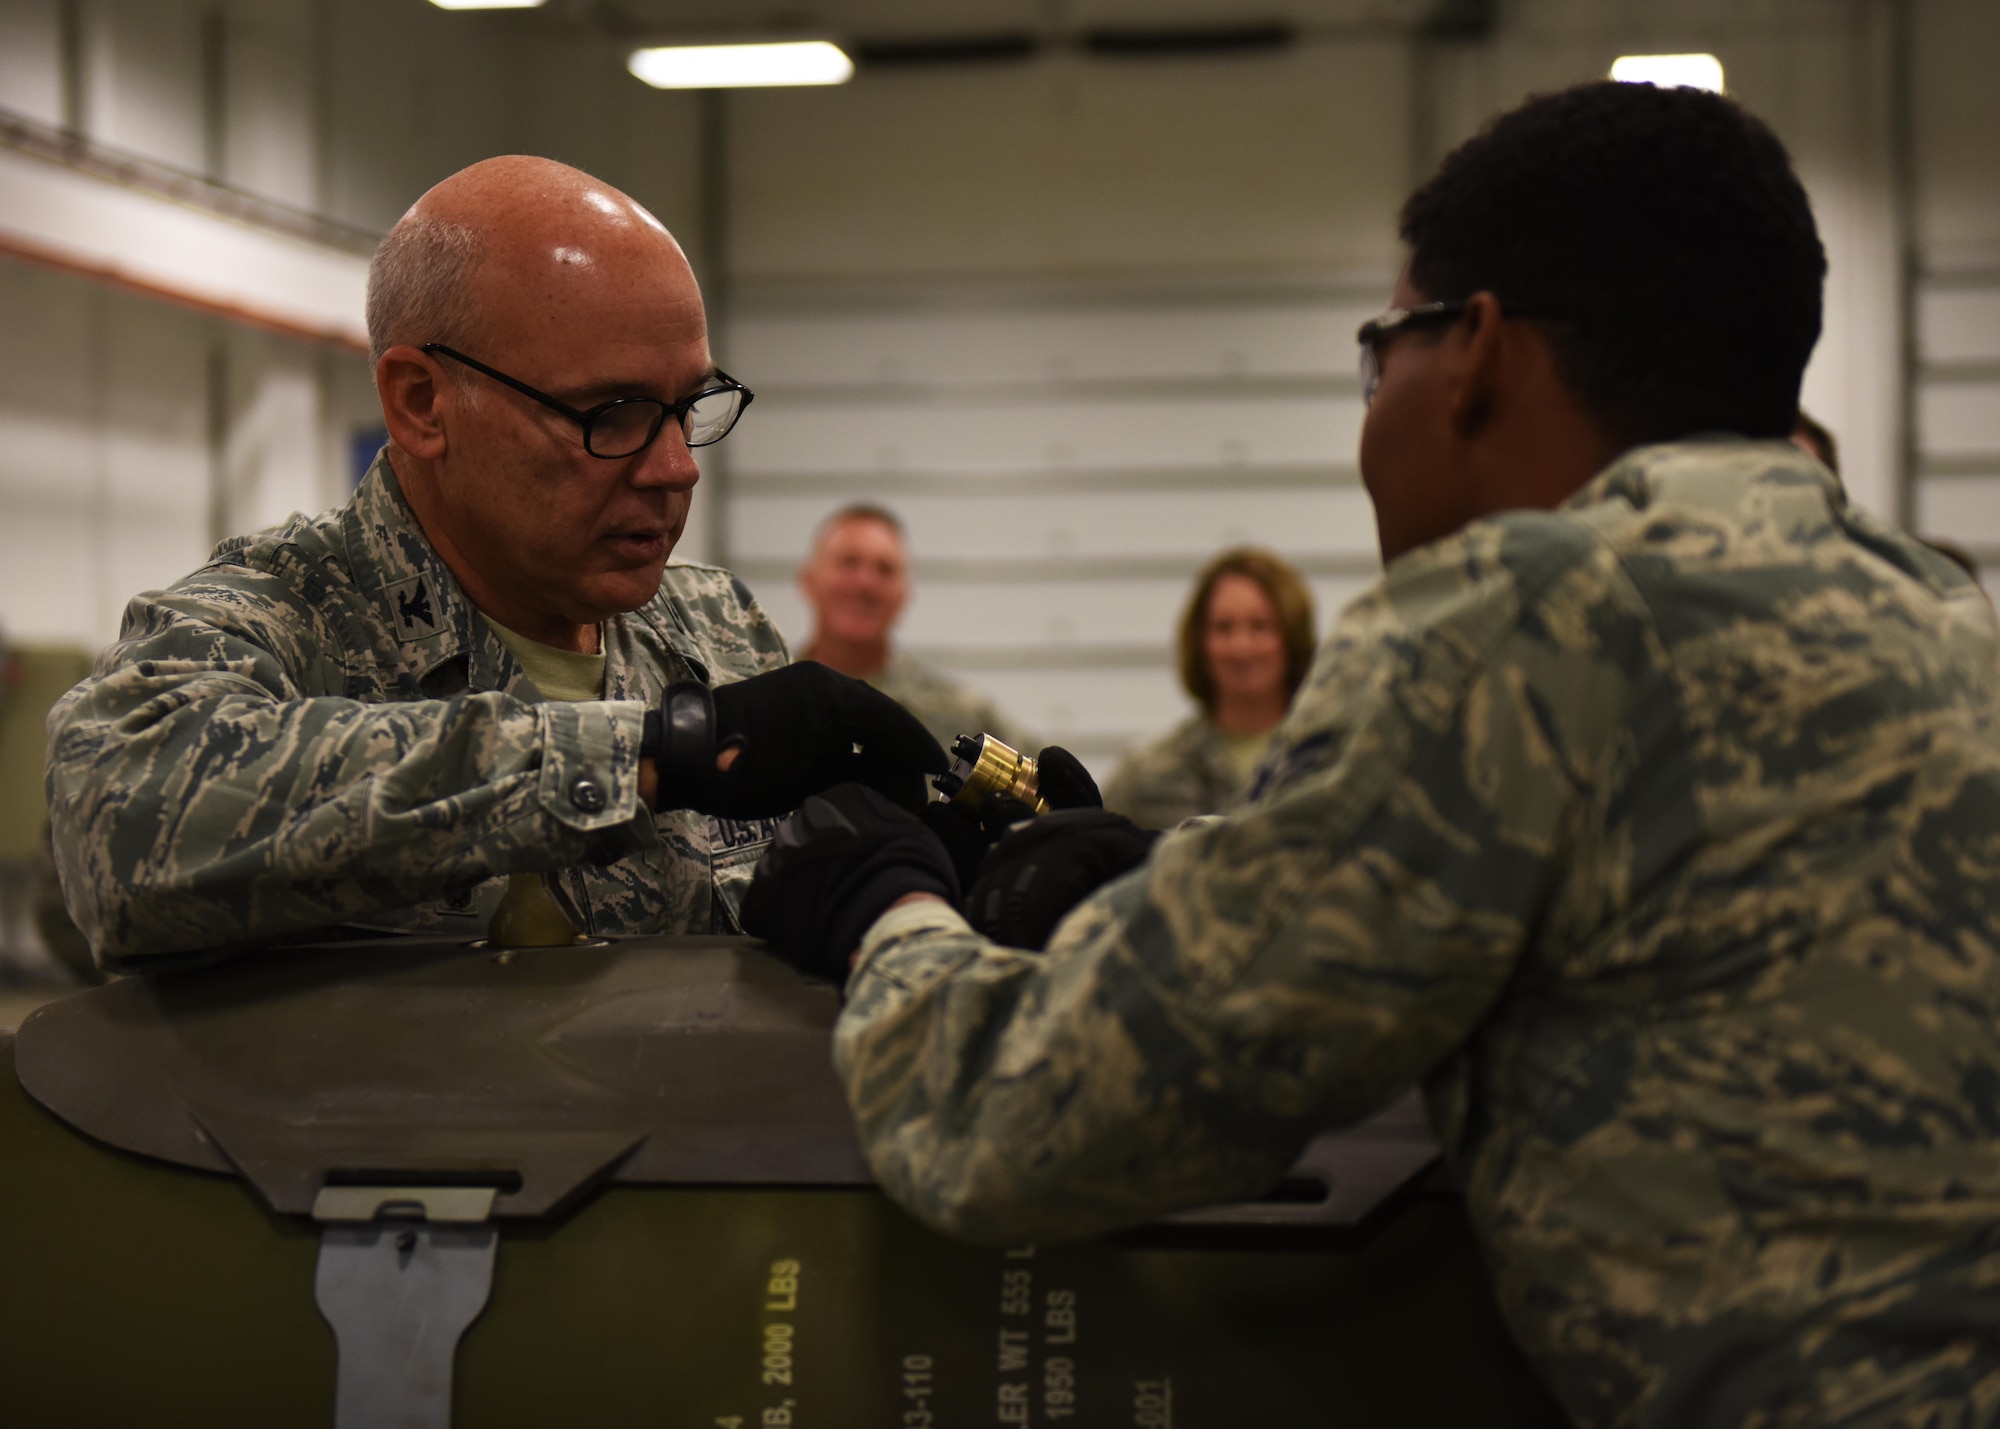 Col. Patrick Matthews, Eighth Air Force vice commander, builds an inert conventional bomb during a tour at Minot Air Force Base, N.D., Sept. 25, 2017. During the tour, Matthews visited the 5th Munitions Squadron, Combat Arms Training and Maintenance, Explosive Ordnance Disposal, Military Working Dogs, 23rd Aircraft Maintenance Unit, and the 5th Operations Support Squadron alert facility.(U.S. Air Force photo by Airman 1st Class Alyssa M. Akers)